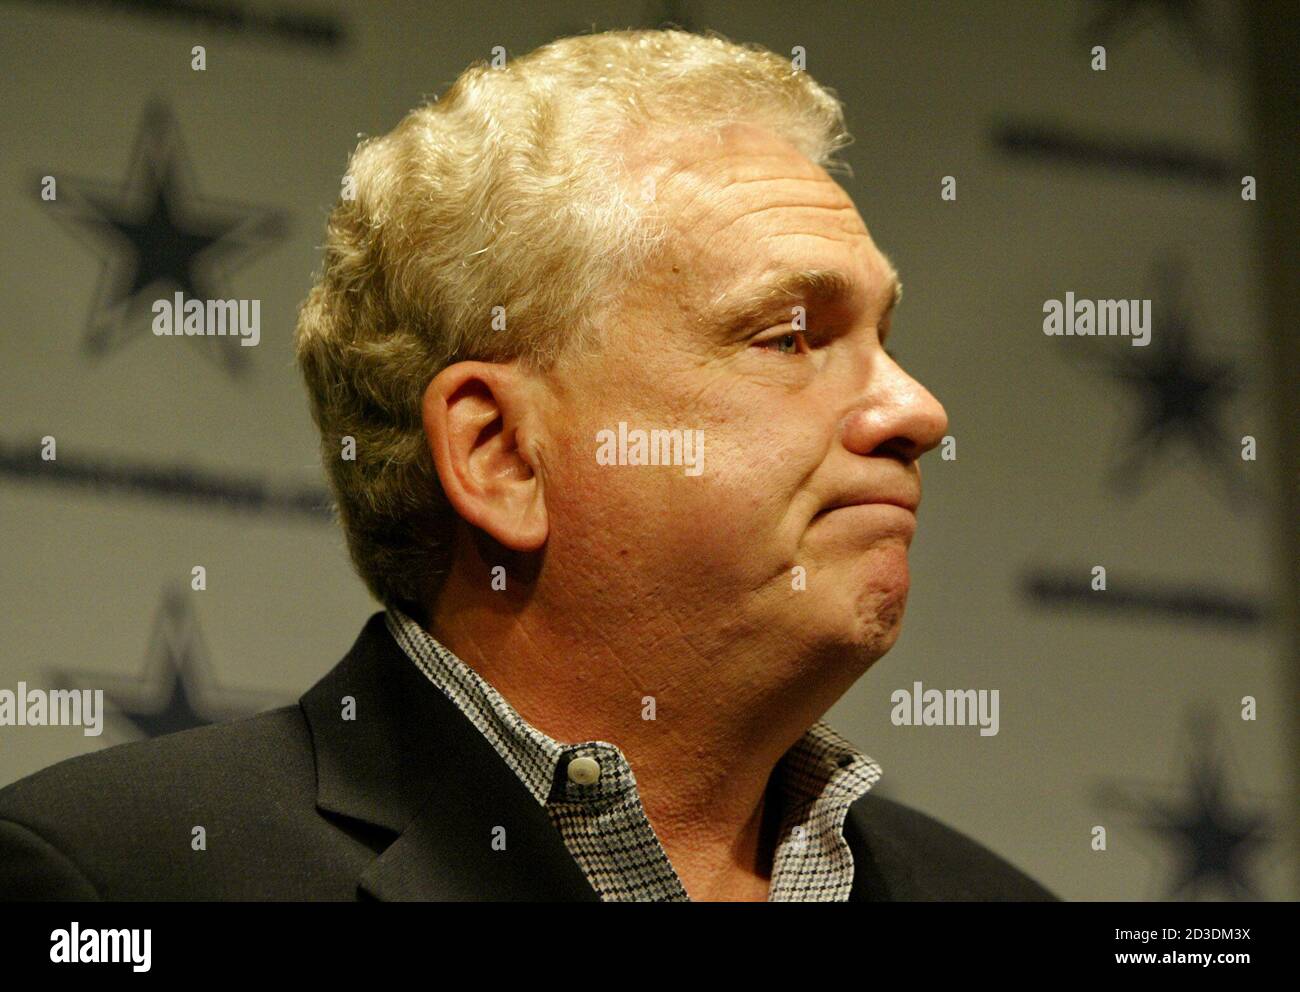 Former Dallas Cowboys head coach Dave Campo reacts during a press  conference December 30, 2002 after being fired by team owner Jerry Jones at  the team's practice headquarters in Irving, Texas. Campo